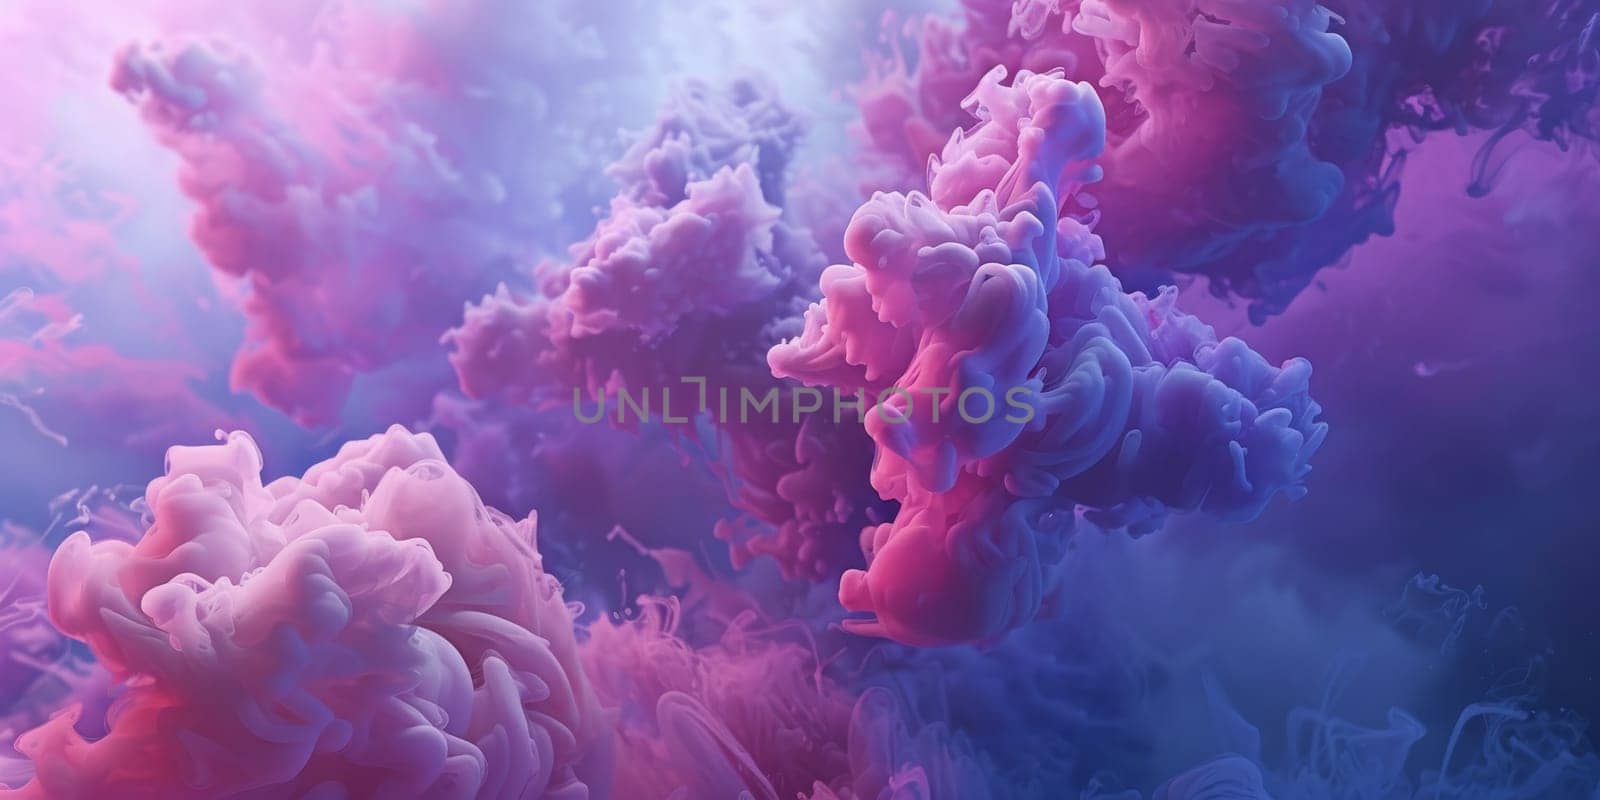 A group of pink and blue clouds floating in an air